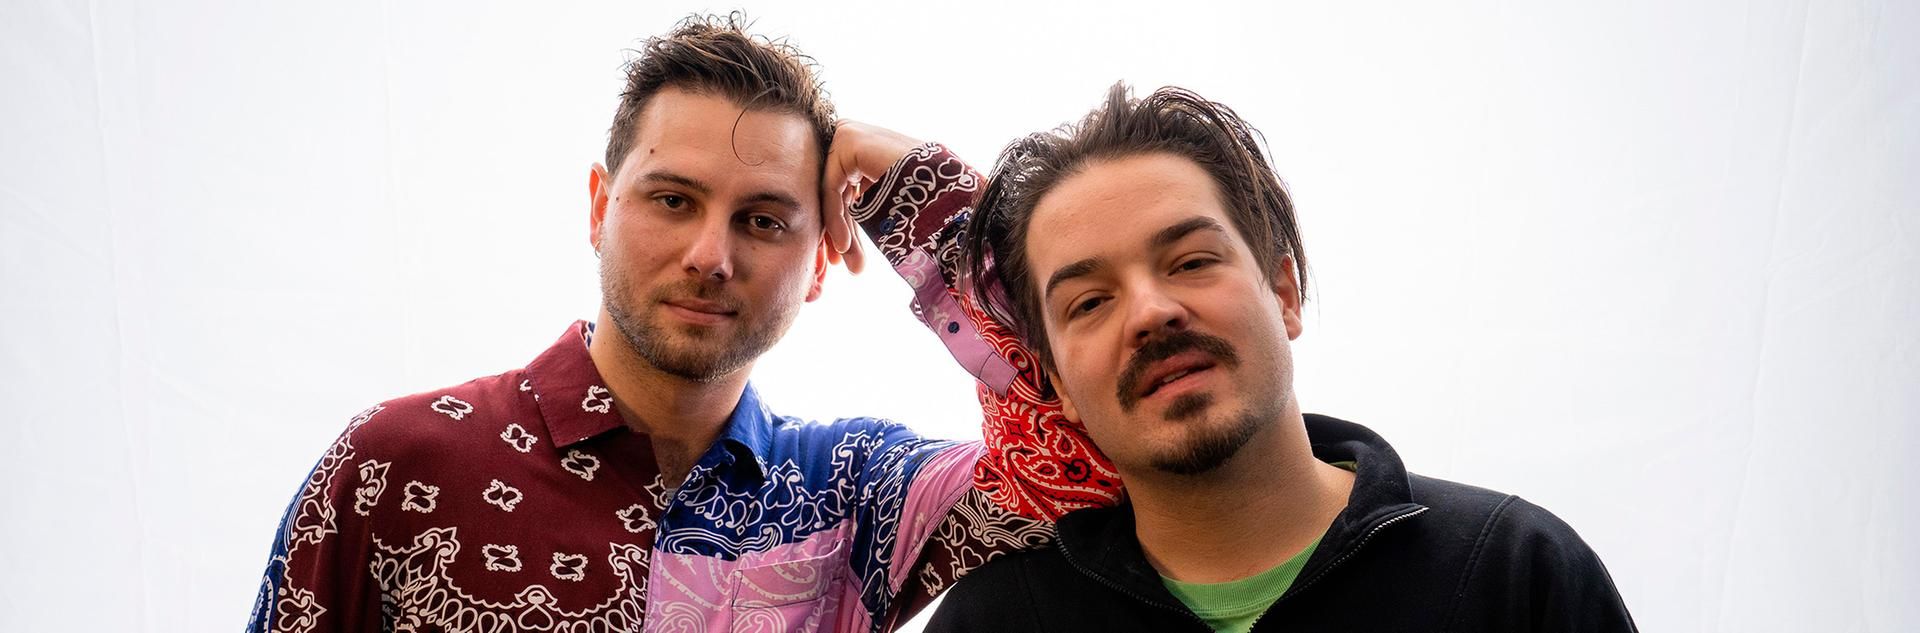 Milky Chance: Two Highschool Friends Making Music